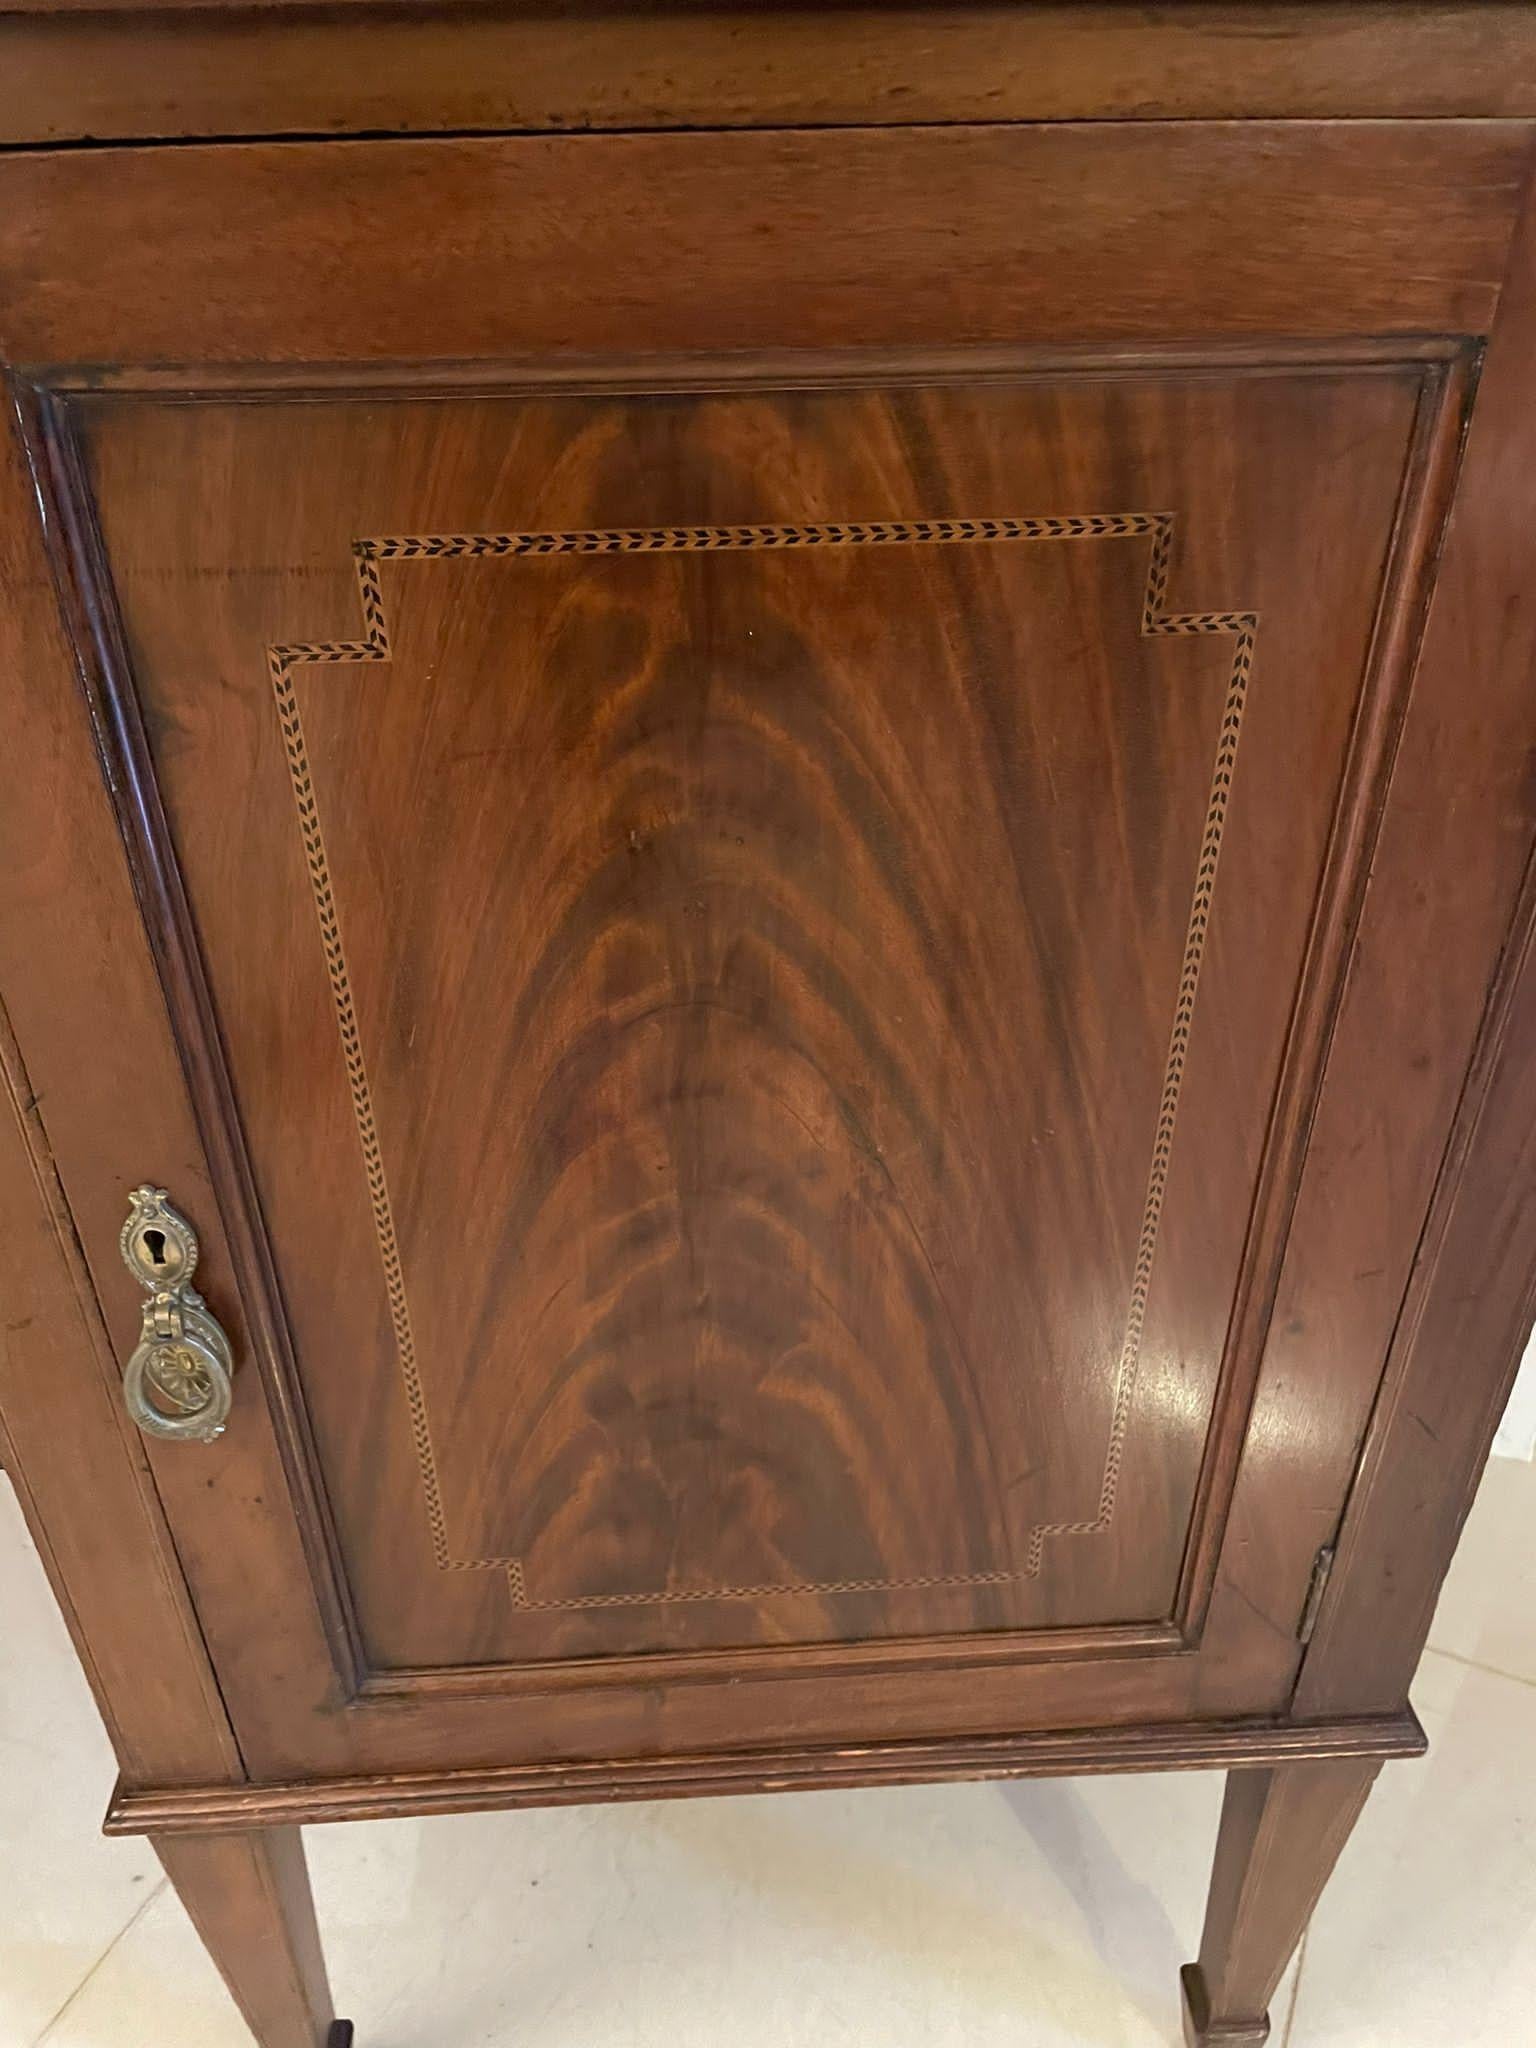 Antique Edwardian Mahogany Inlaid Sideboard by Hamptons and Sons In Good Condition For Sale In Suffolk, GB